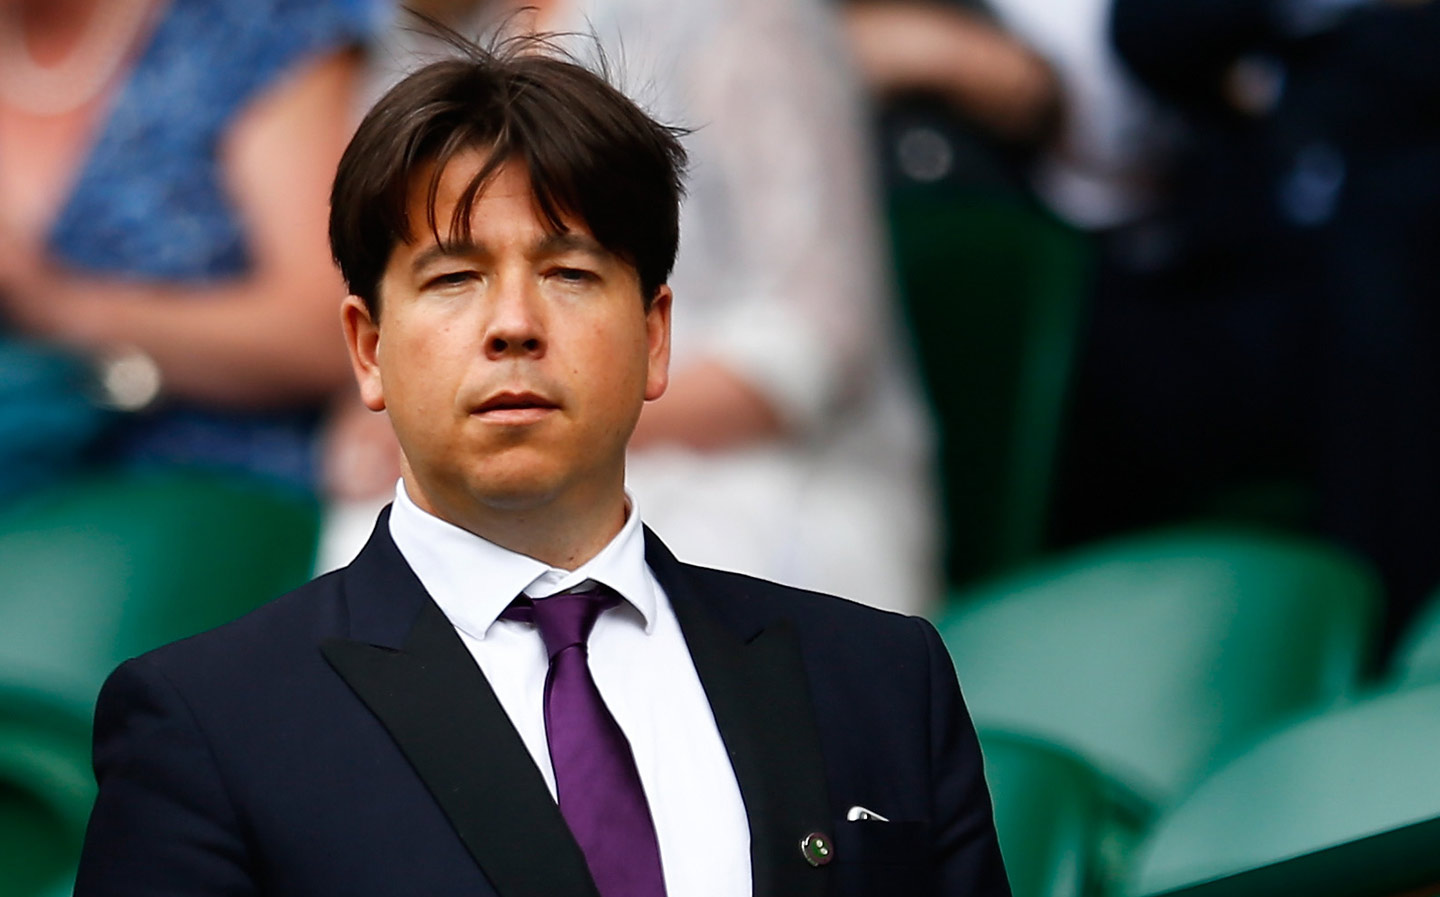 Michael McIntyre robbed during school run by scooter gang — £15k watch stolen